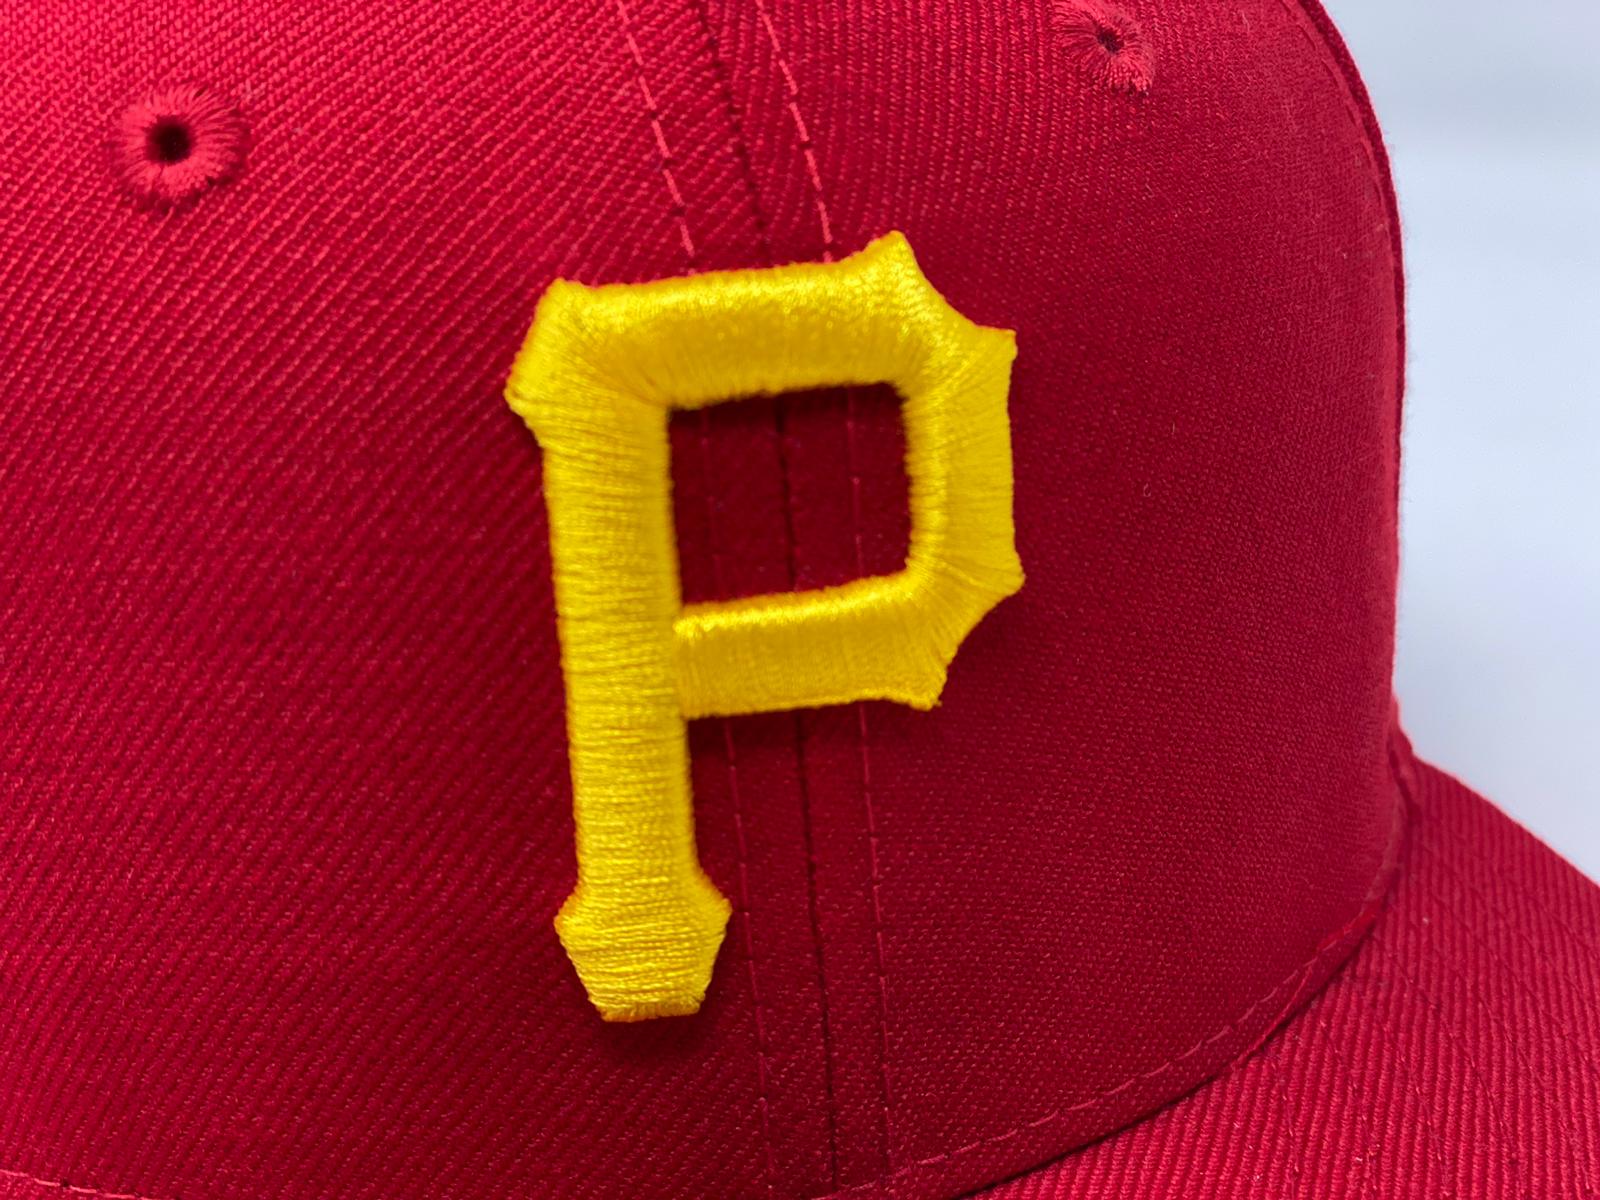 Pittsburgh Pirates URBAN CAMO-BOTTOM Lava Red Fitted Hat